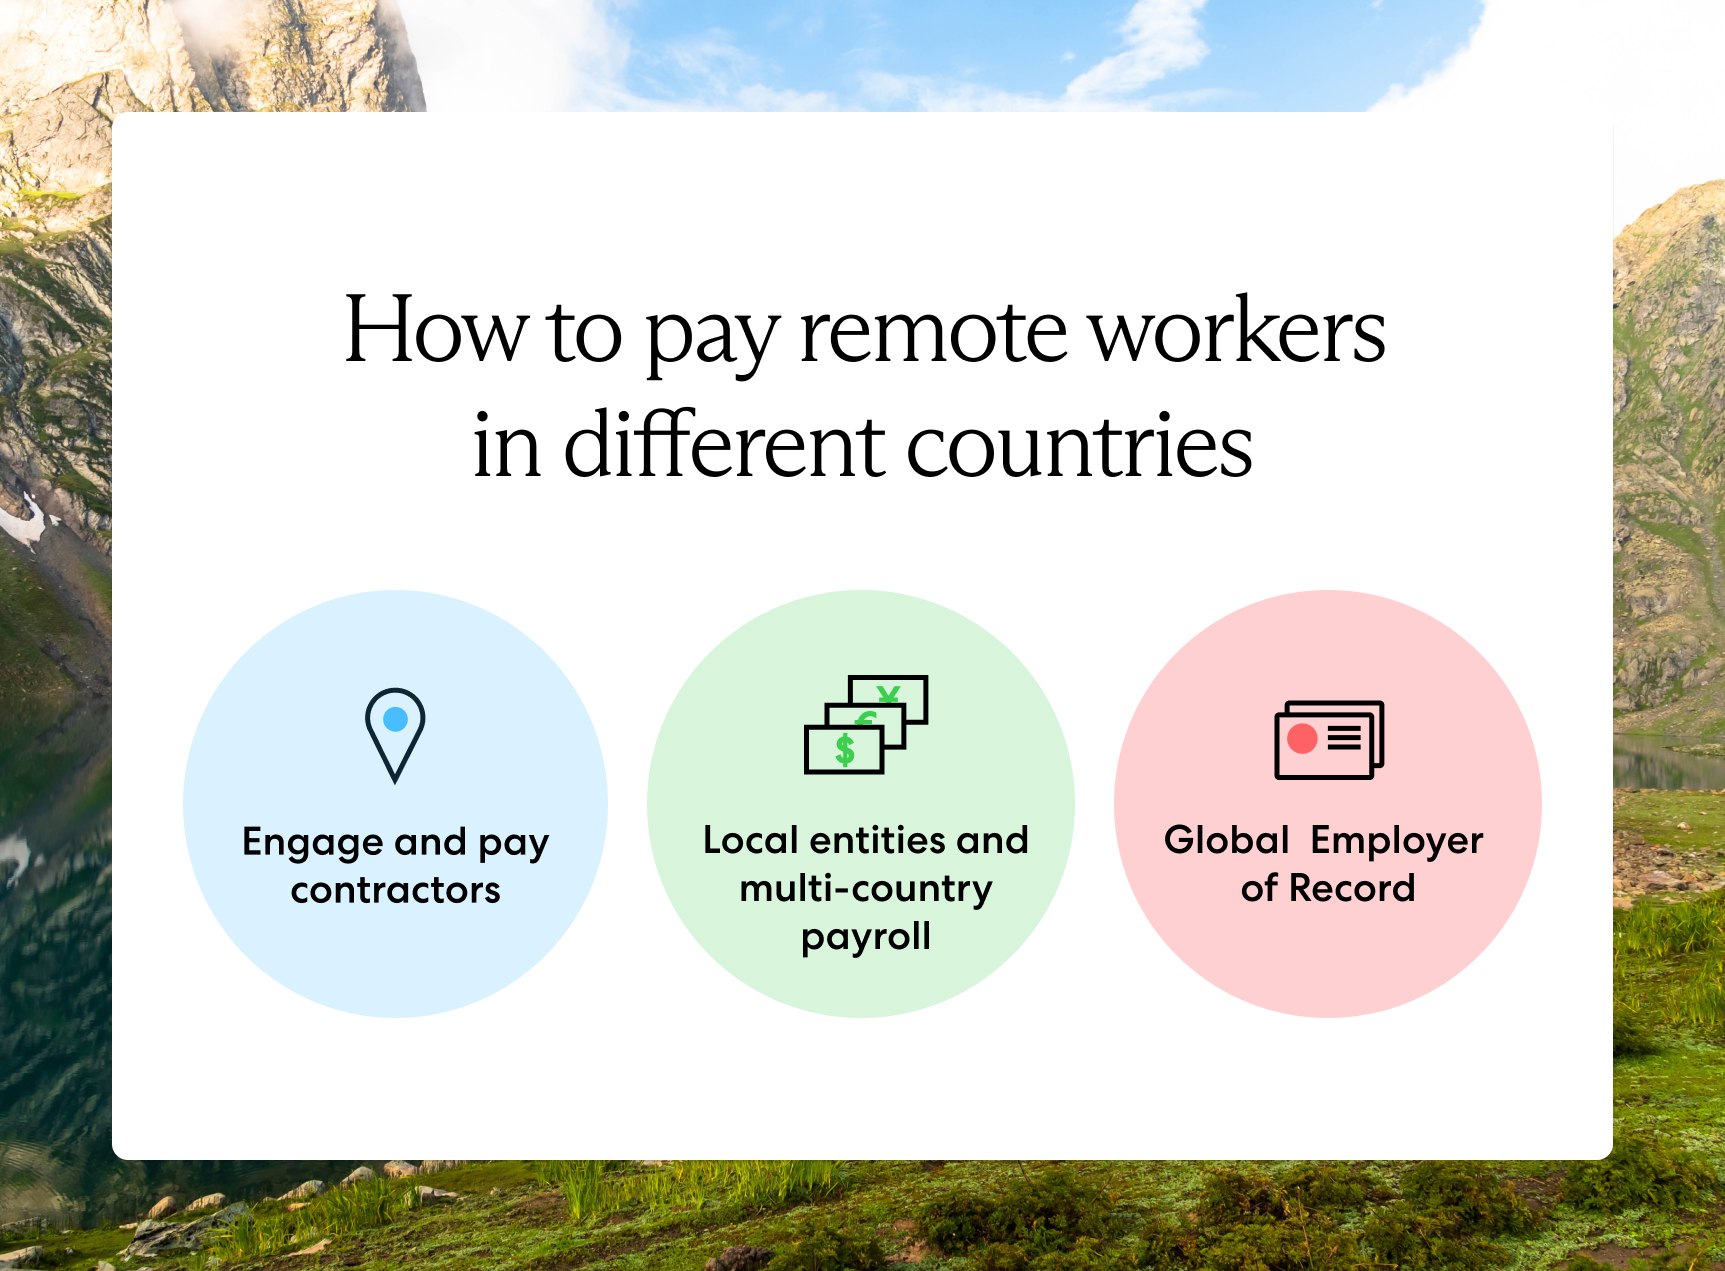 Three ways to pay remote workers